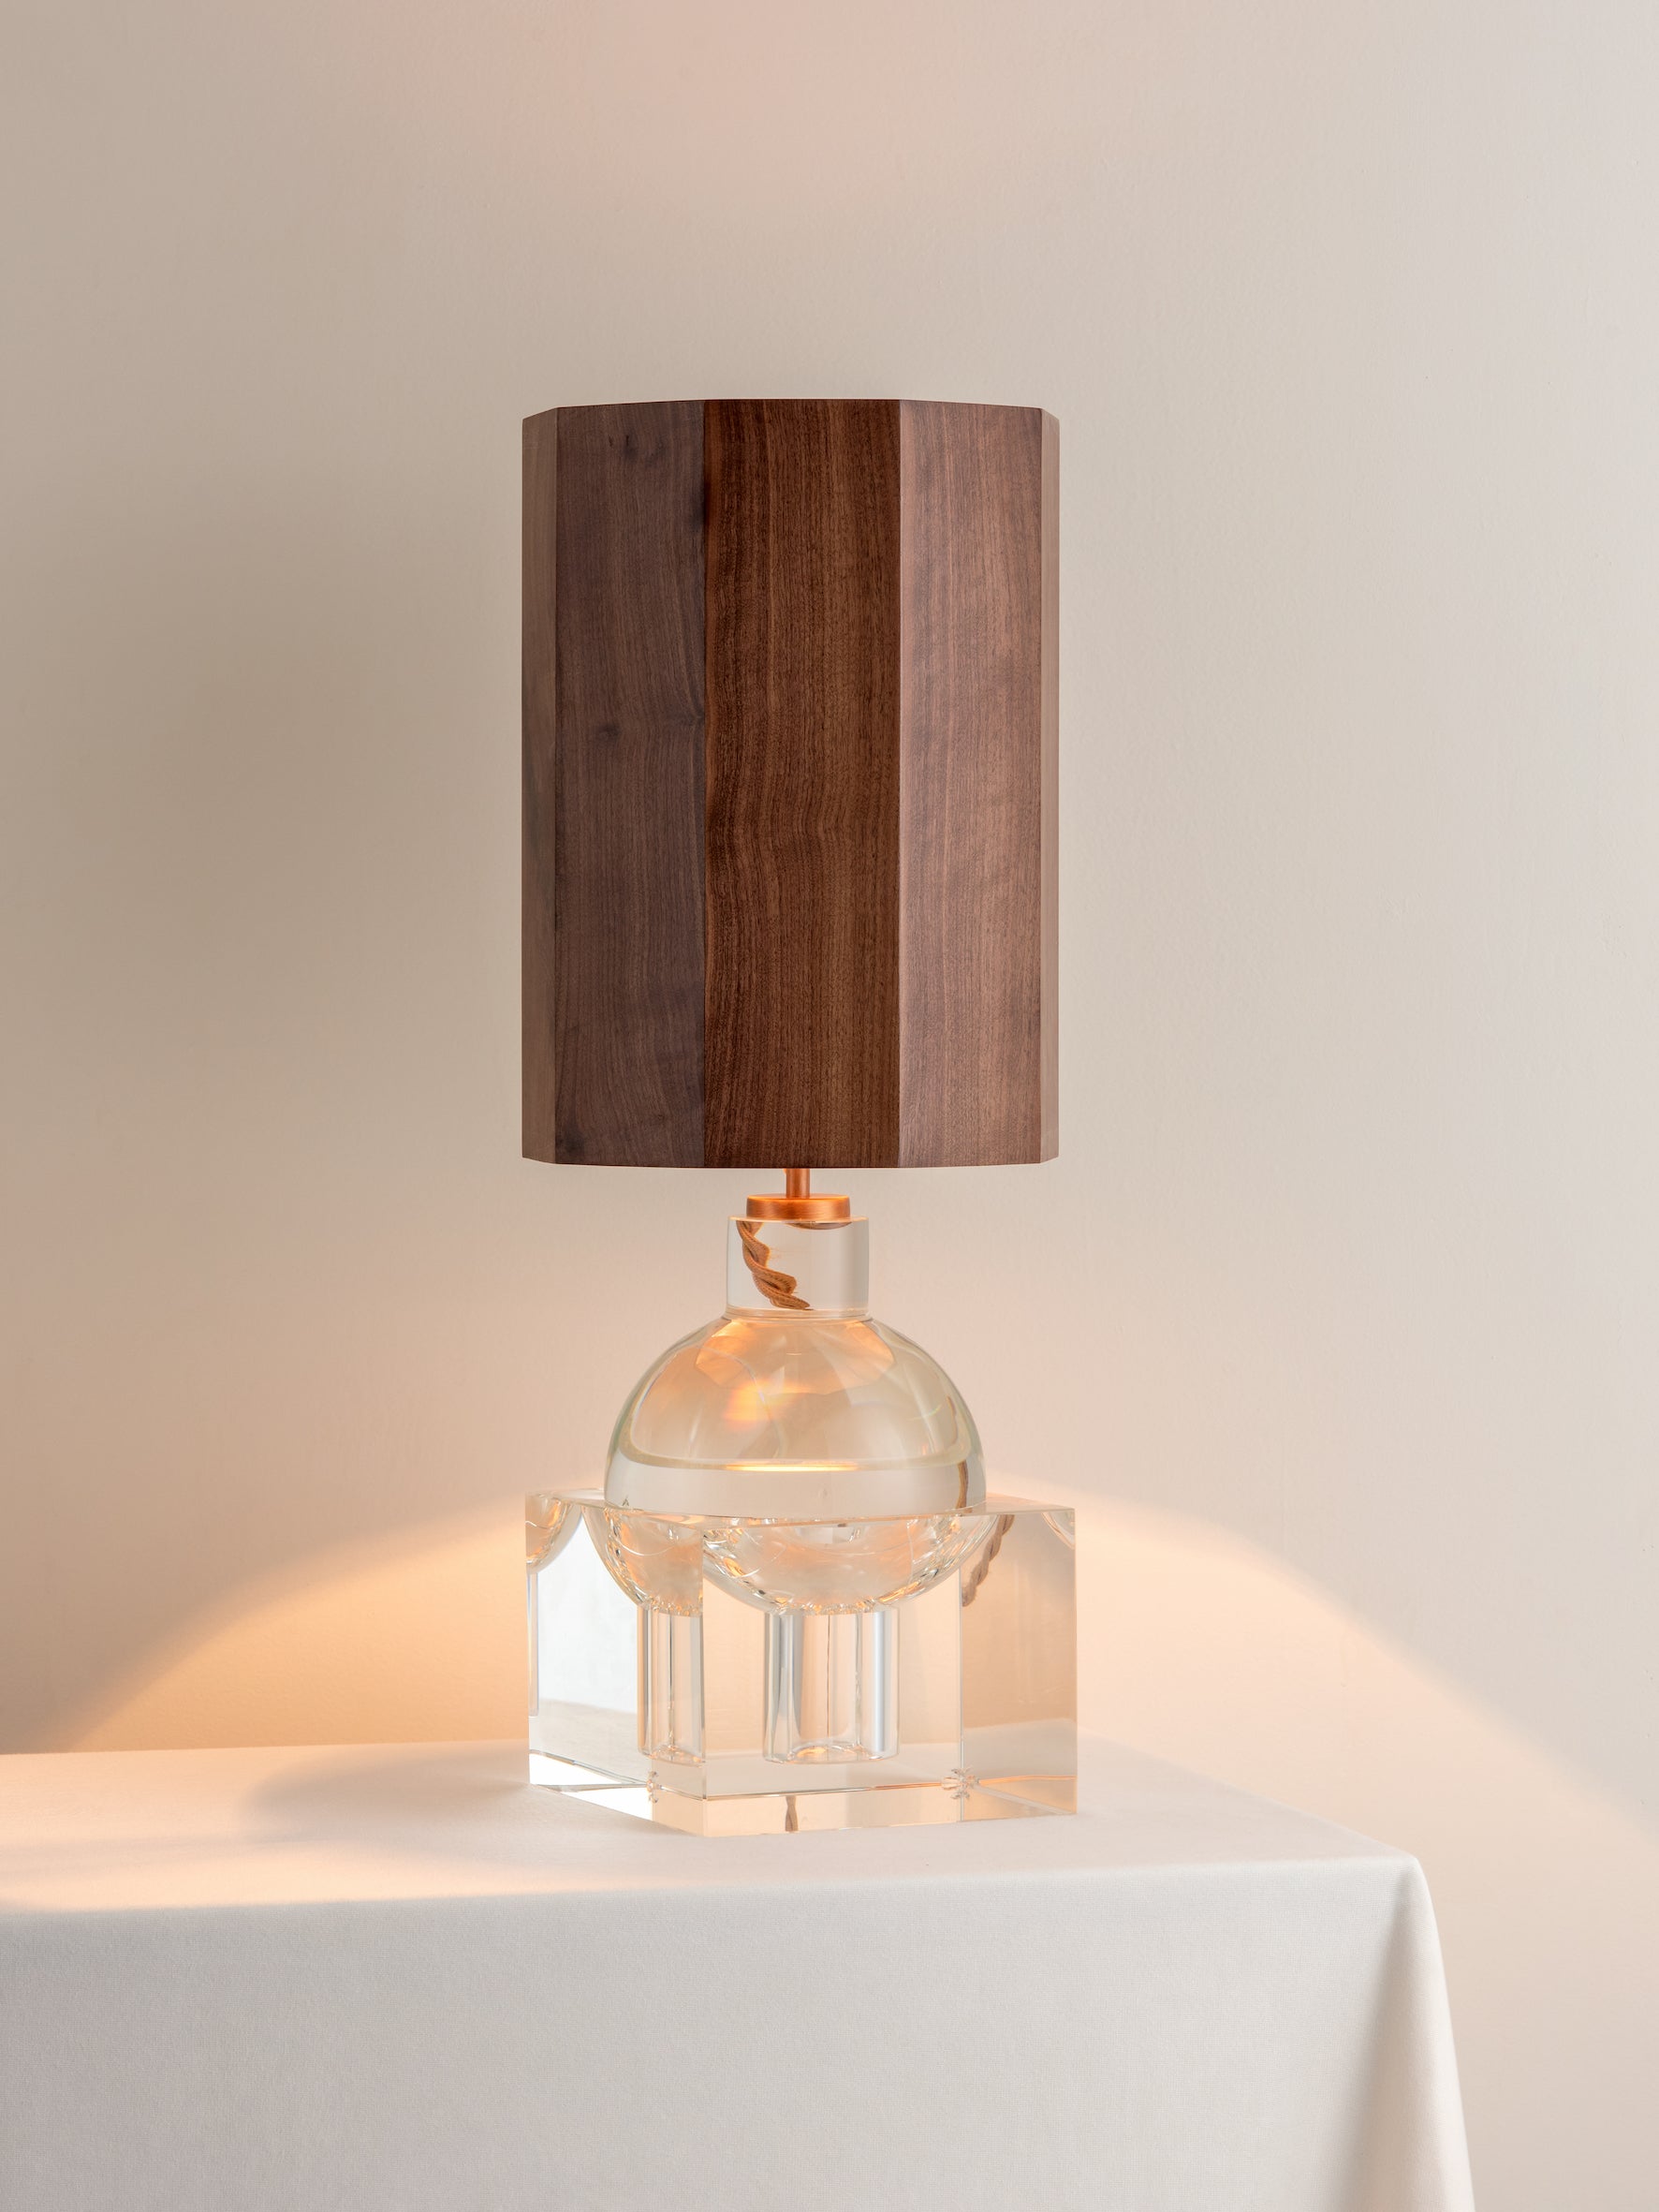 Editions crystal lamp with + walnut wood shade | Table Lamp | Lights & Lamps | UK | Modern Affordable Designer Lighting